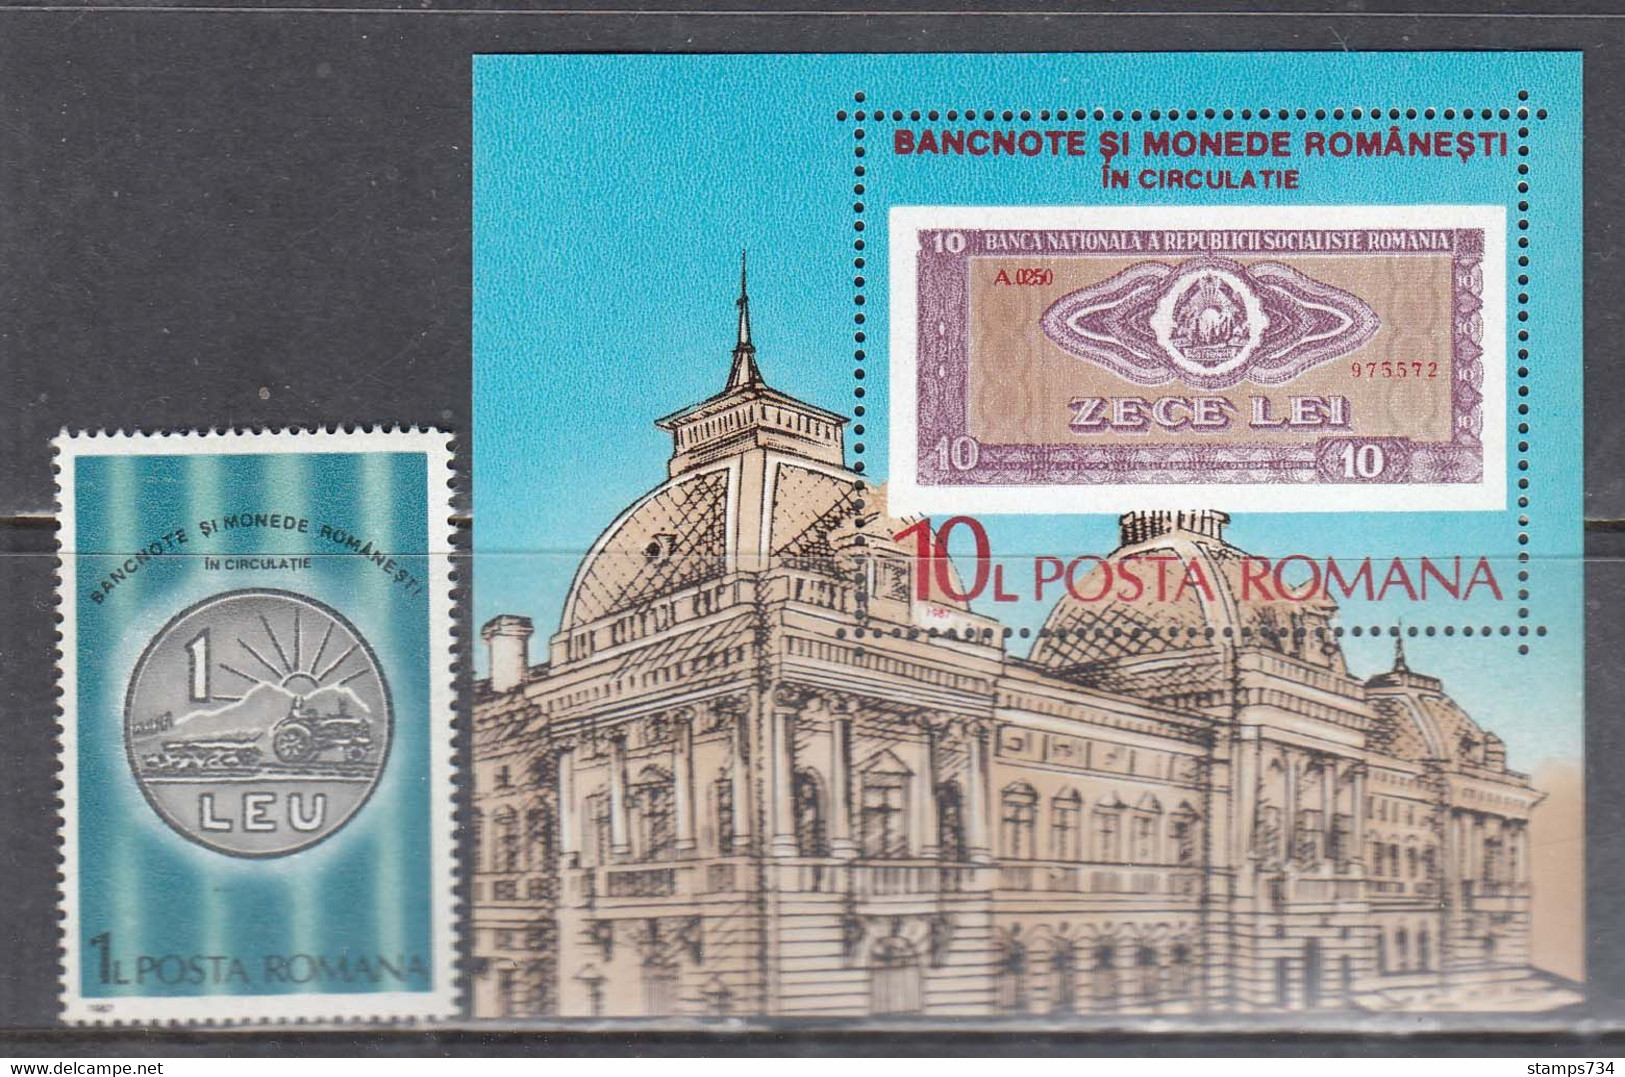 Romania 1987 - Circulating Romanian Banknotes And Coins, Mi-Nr. 4339+Bl. 233, MNH** - Unused Stamps